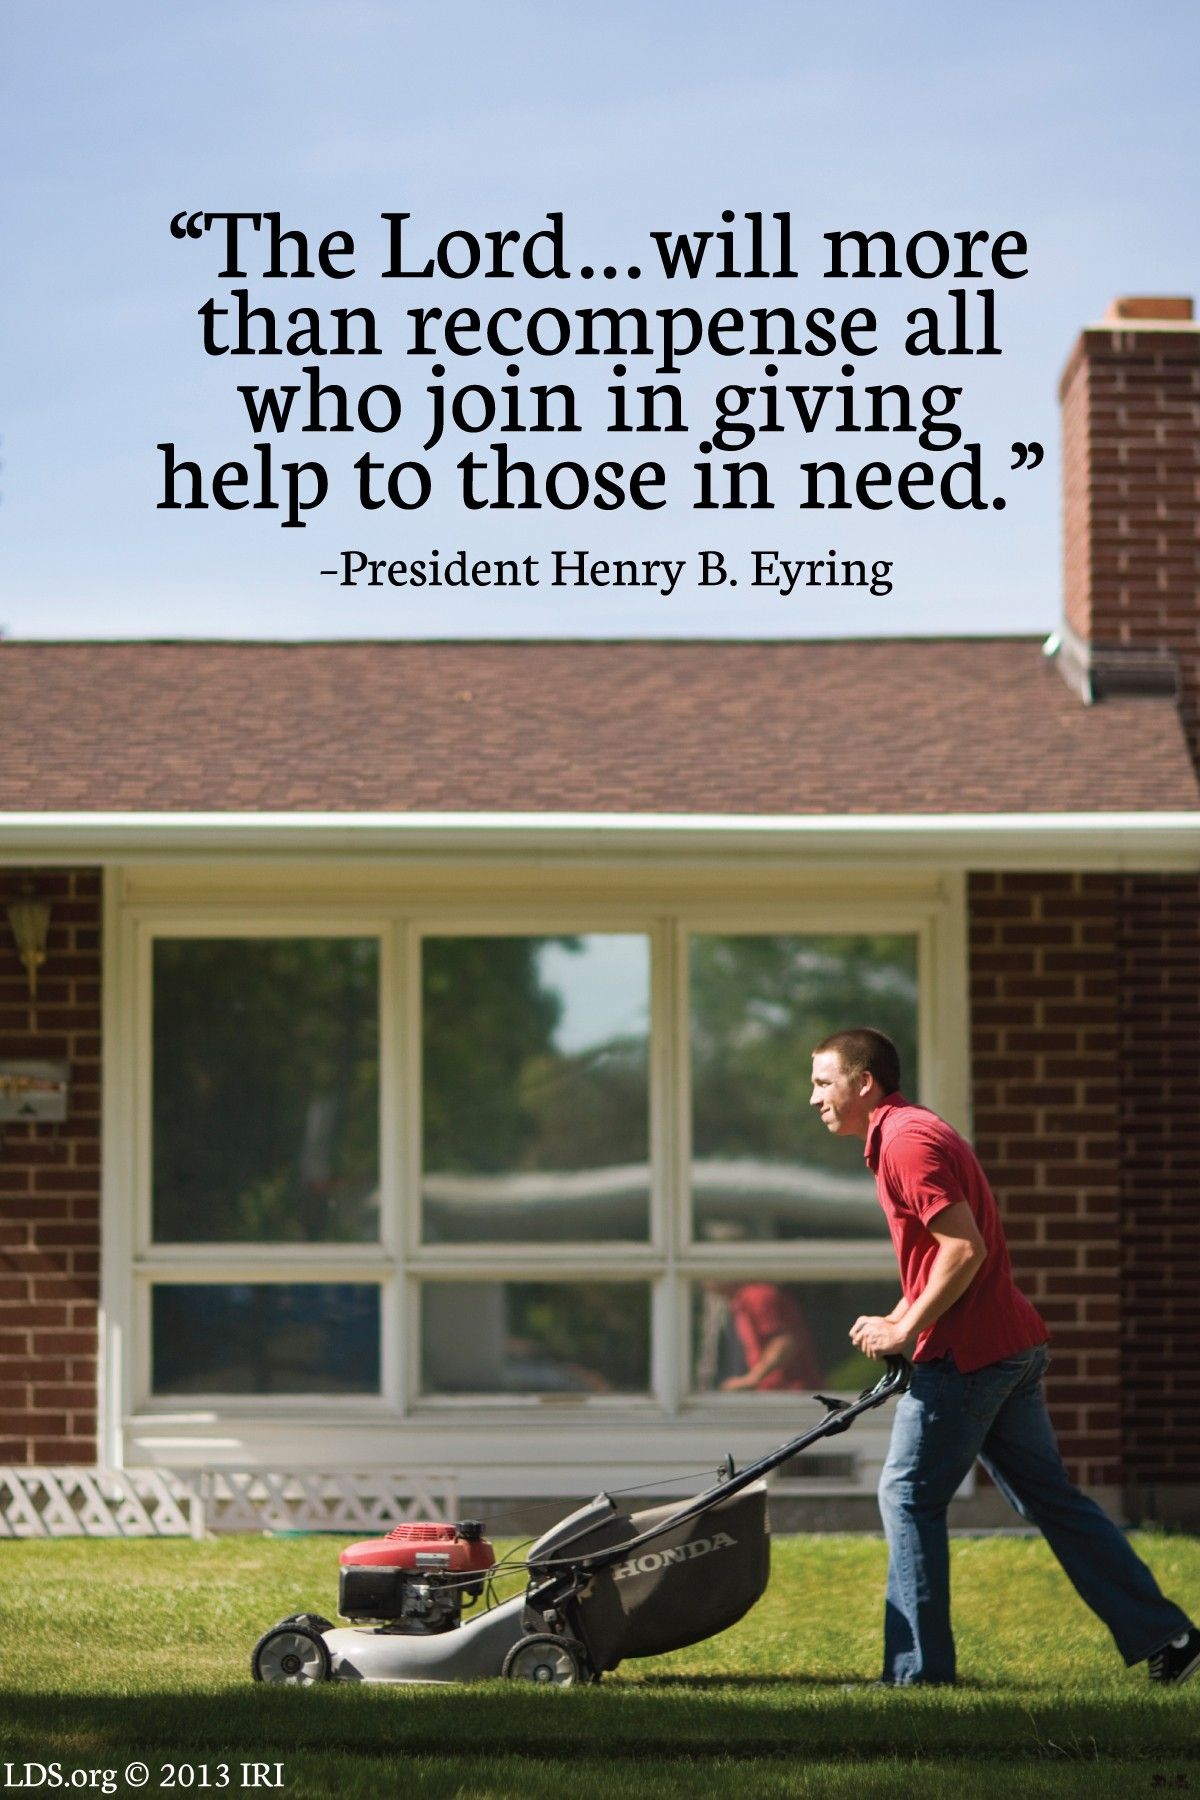 “The Lord … will more than recompense all who join in giving help to those in need.”—President Henry B. Eyring, “Bind Up Their Wounds” © undefined ipCode 1.